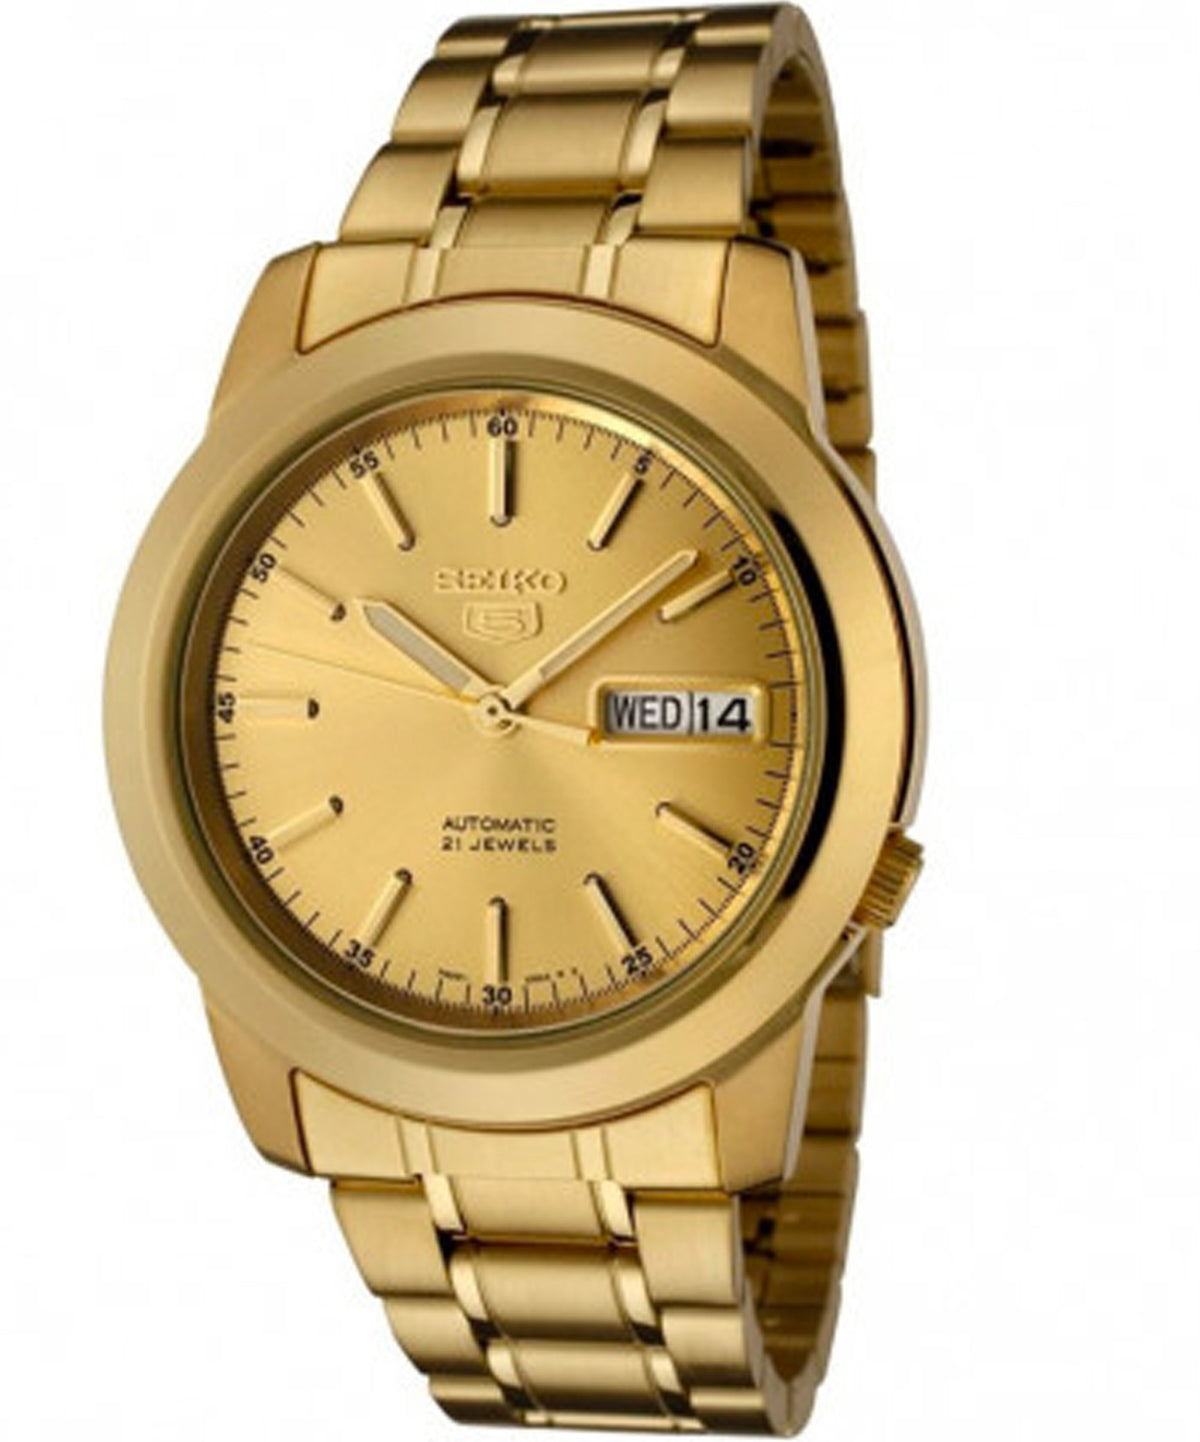 Seiko Men's Mechanical Watch Analog, Gold Dial Gold Stainless Band, SNKE56J